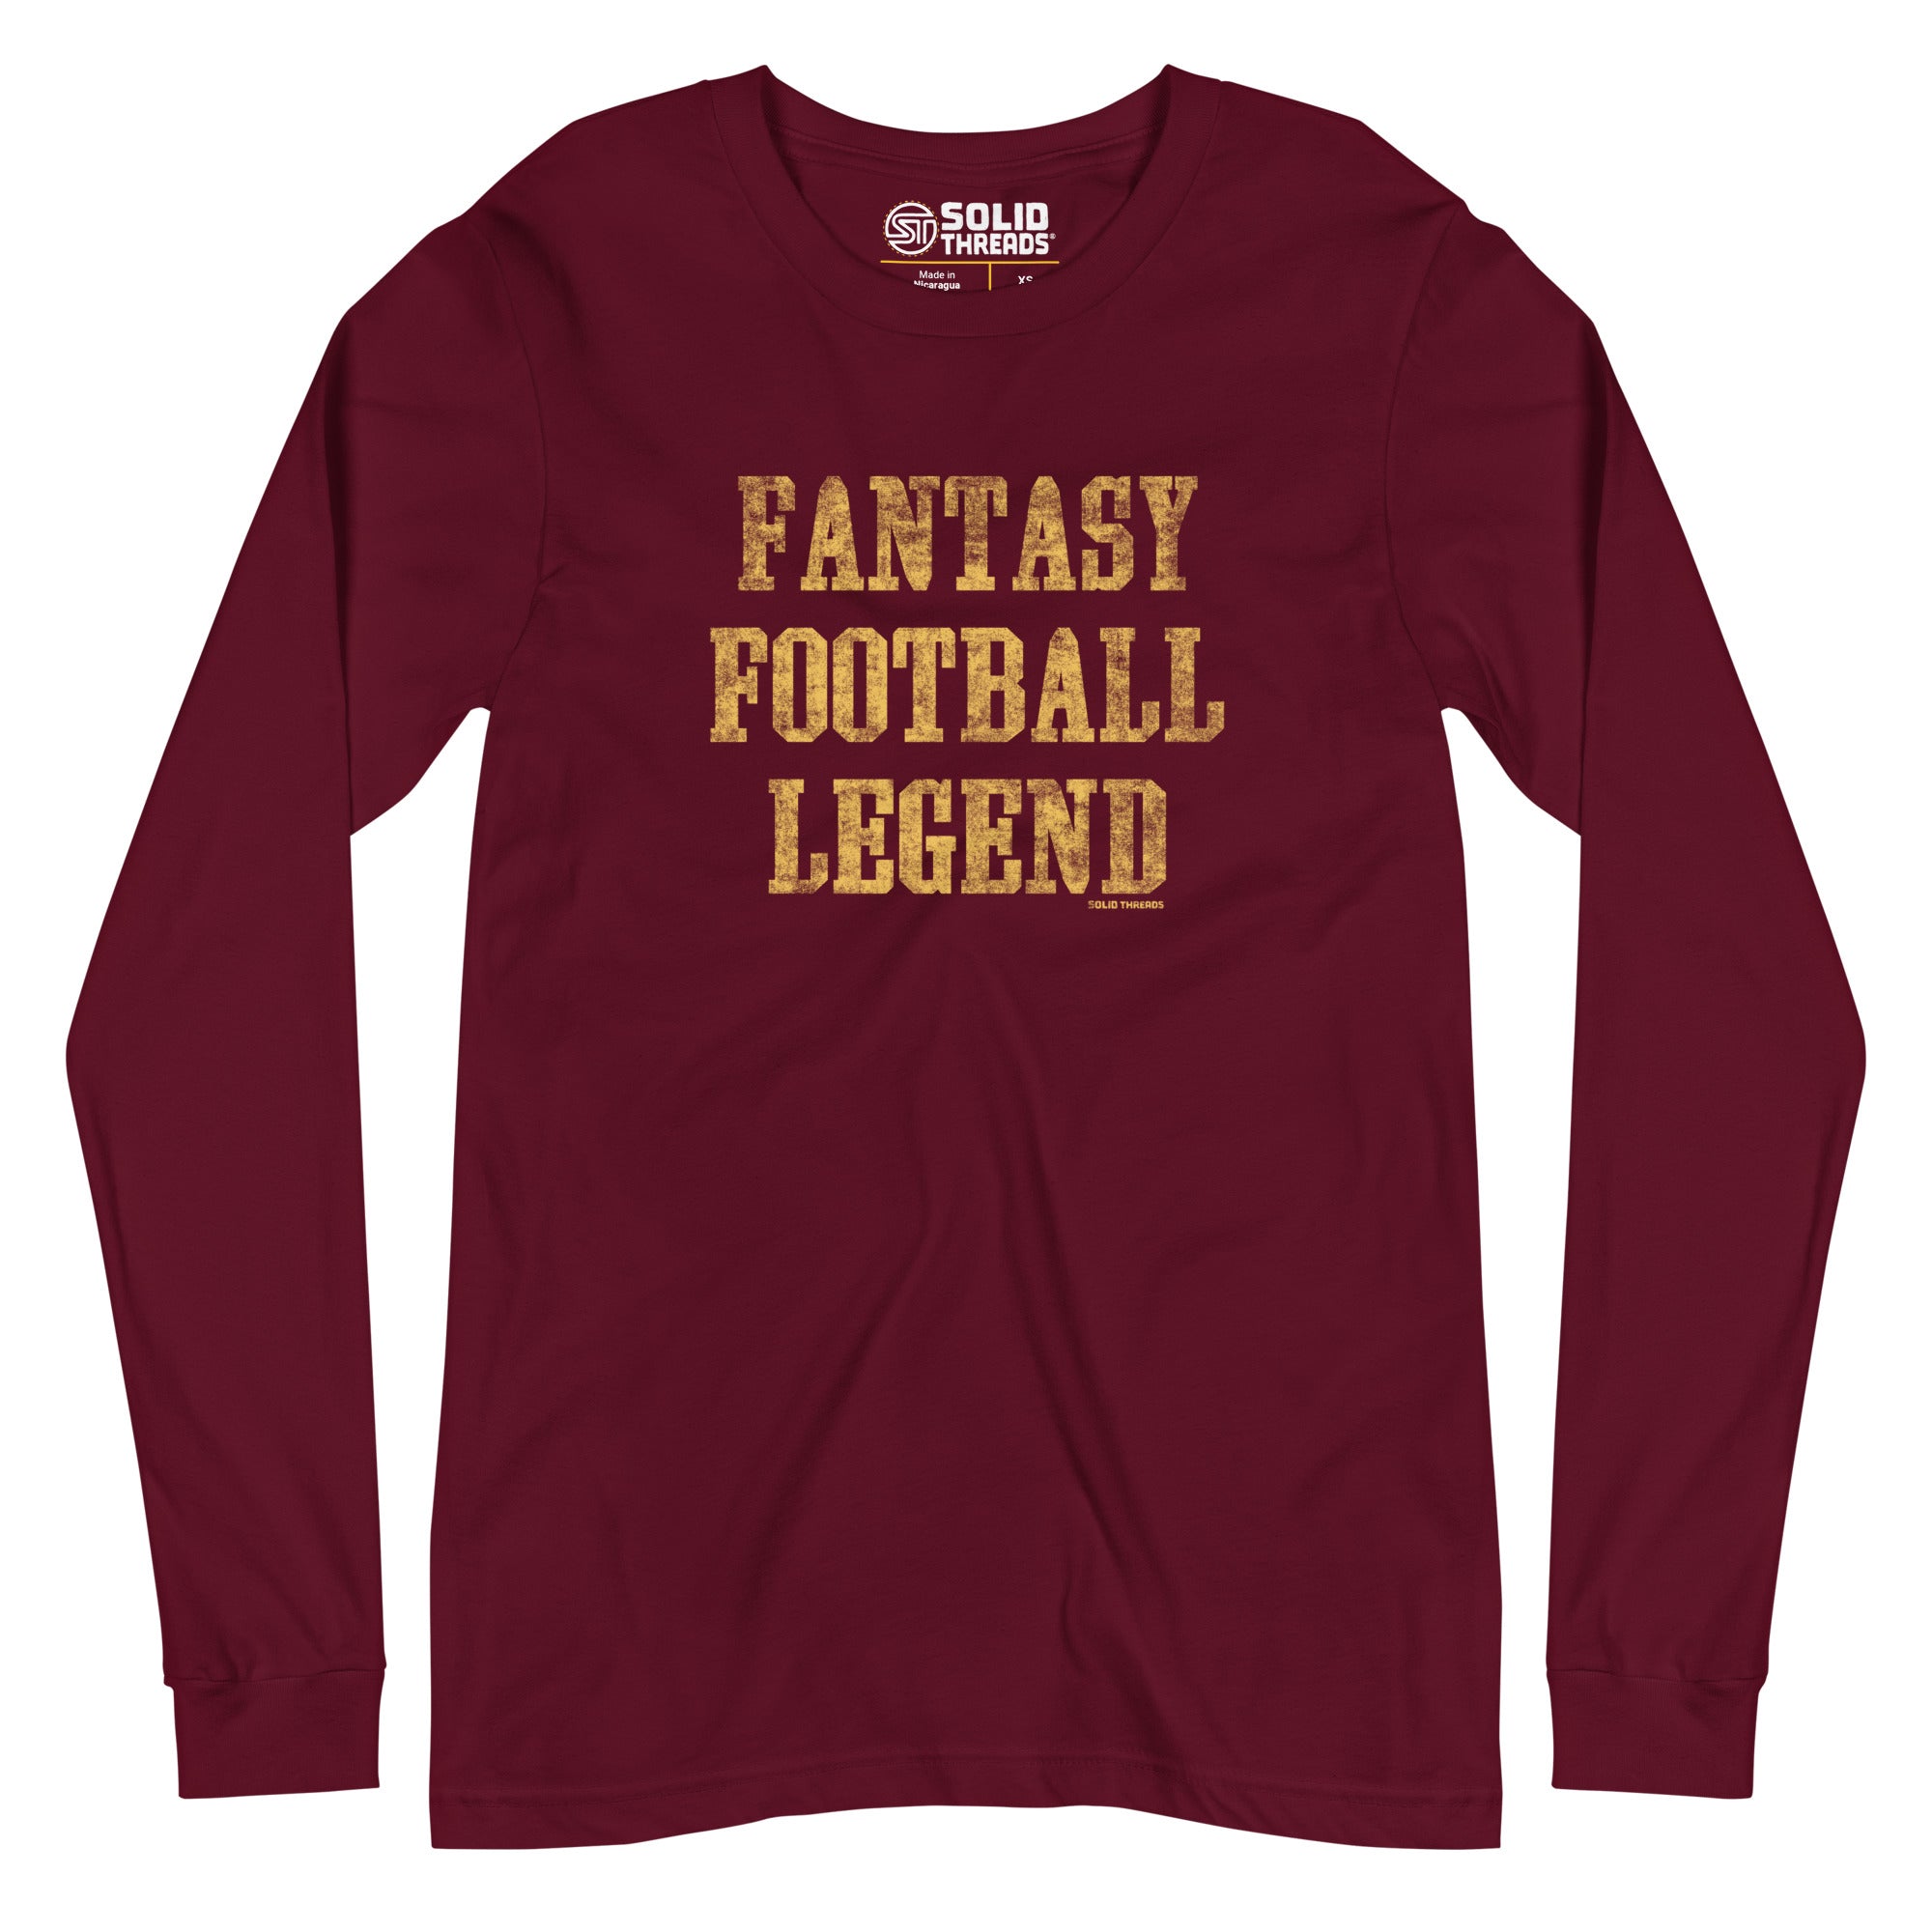 Fantasy Football Legend Vintage Graphic Tee | Funny Sports T shirt | Solid Threads